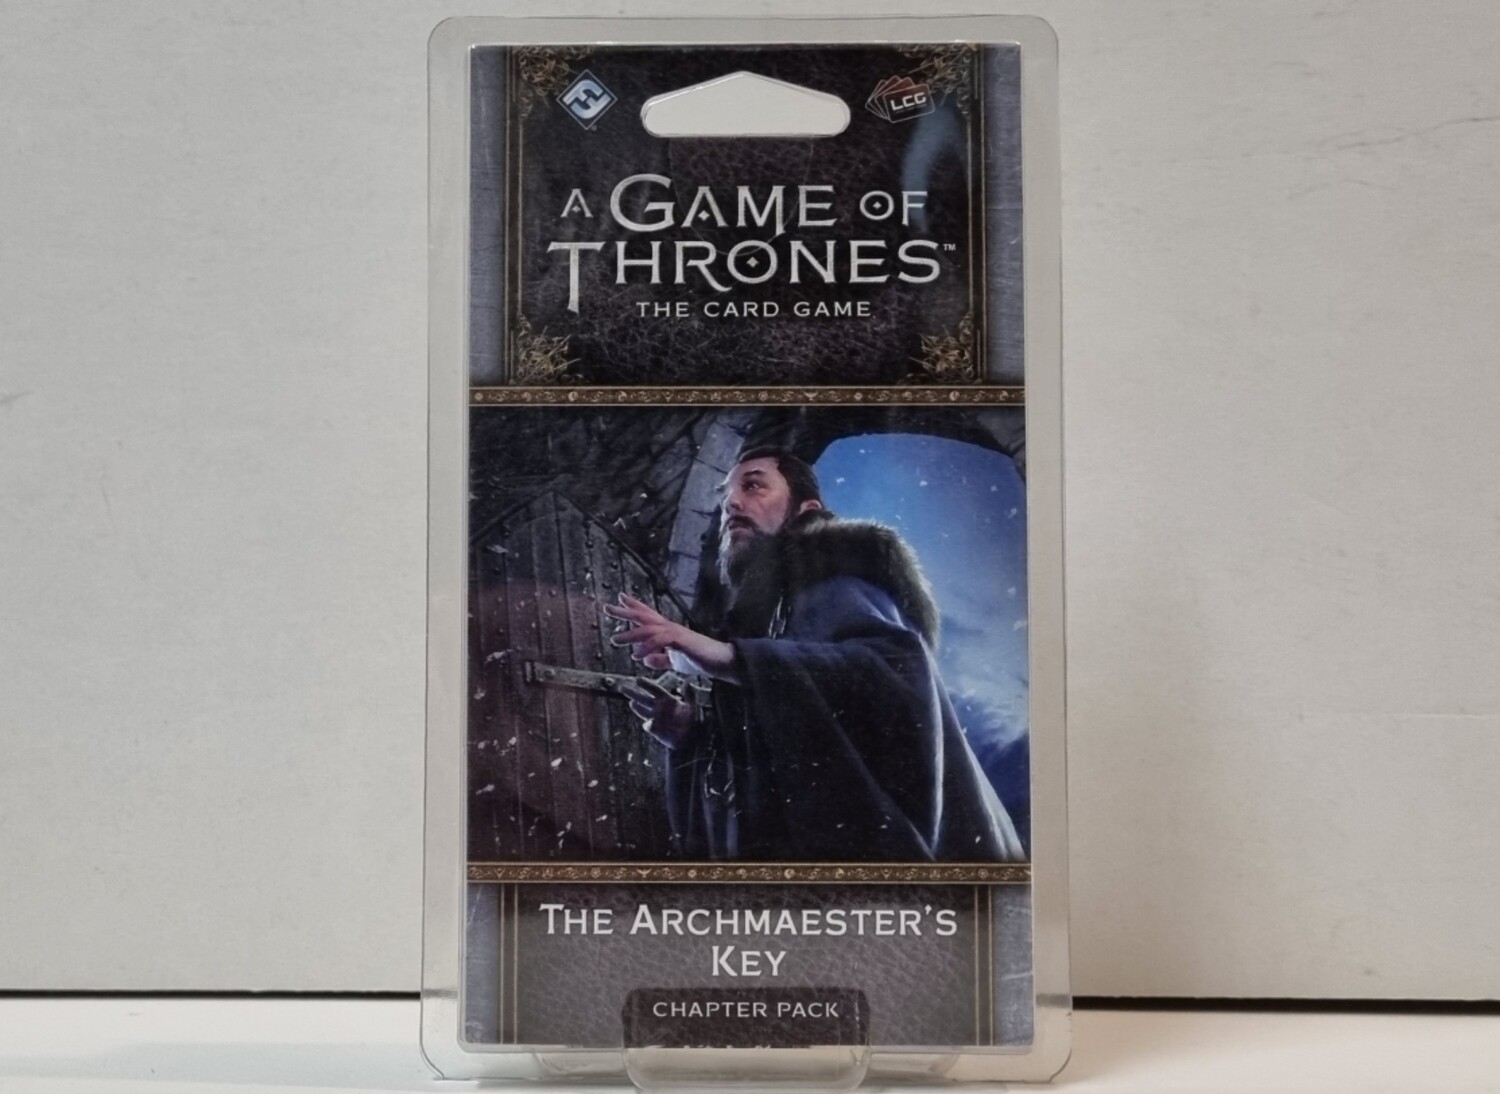 A Game of Thrones, Card Game, The Archmaester's Key, Chapter Pack